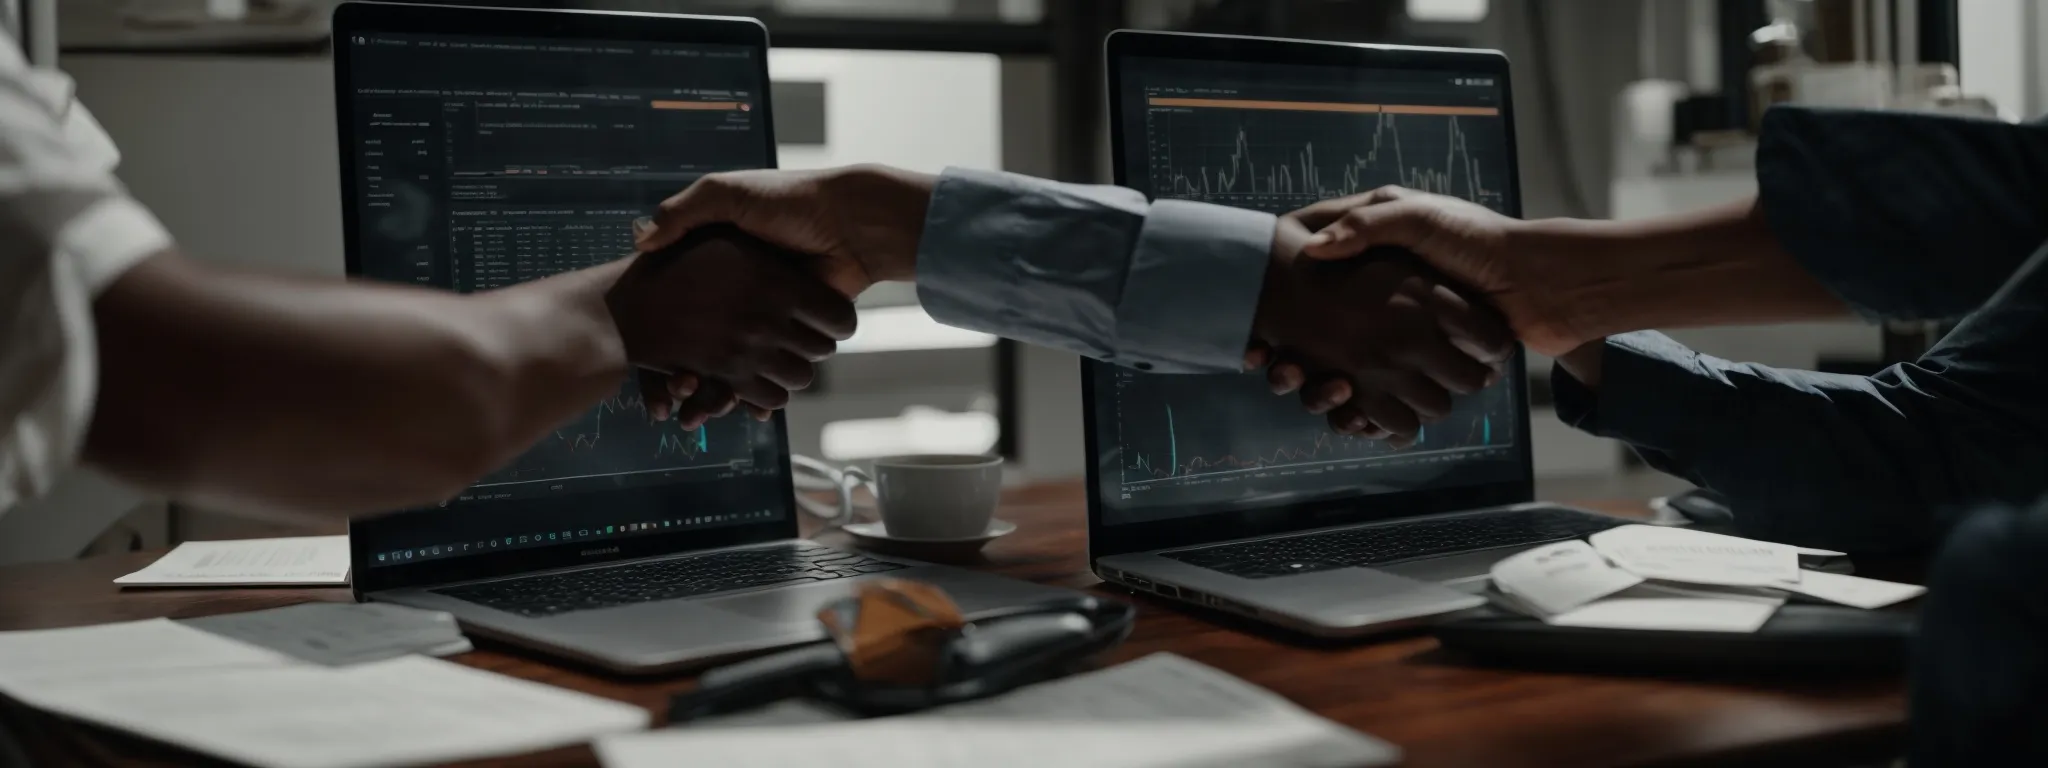 two professionals shaking hands across a table with a laptop displaying graphs open in front of them, symbolizing a partnership agreement.